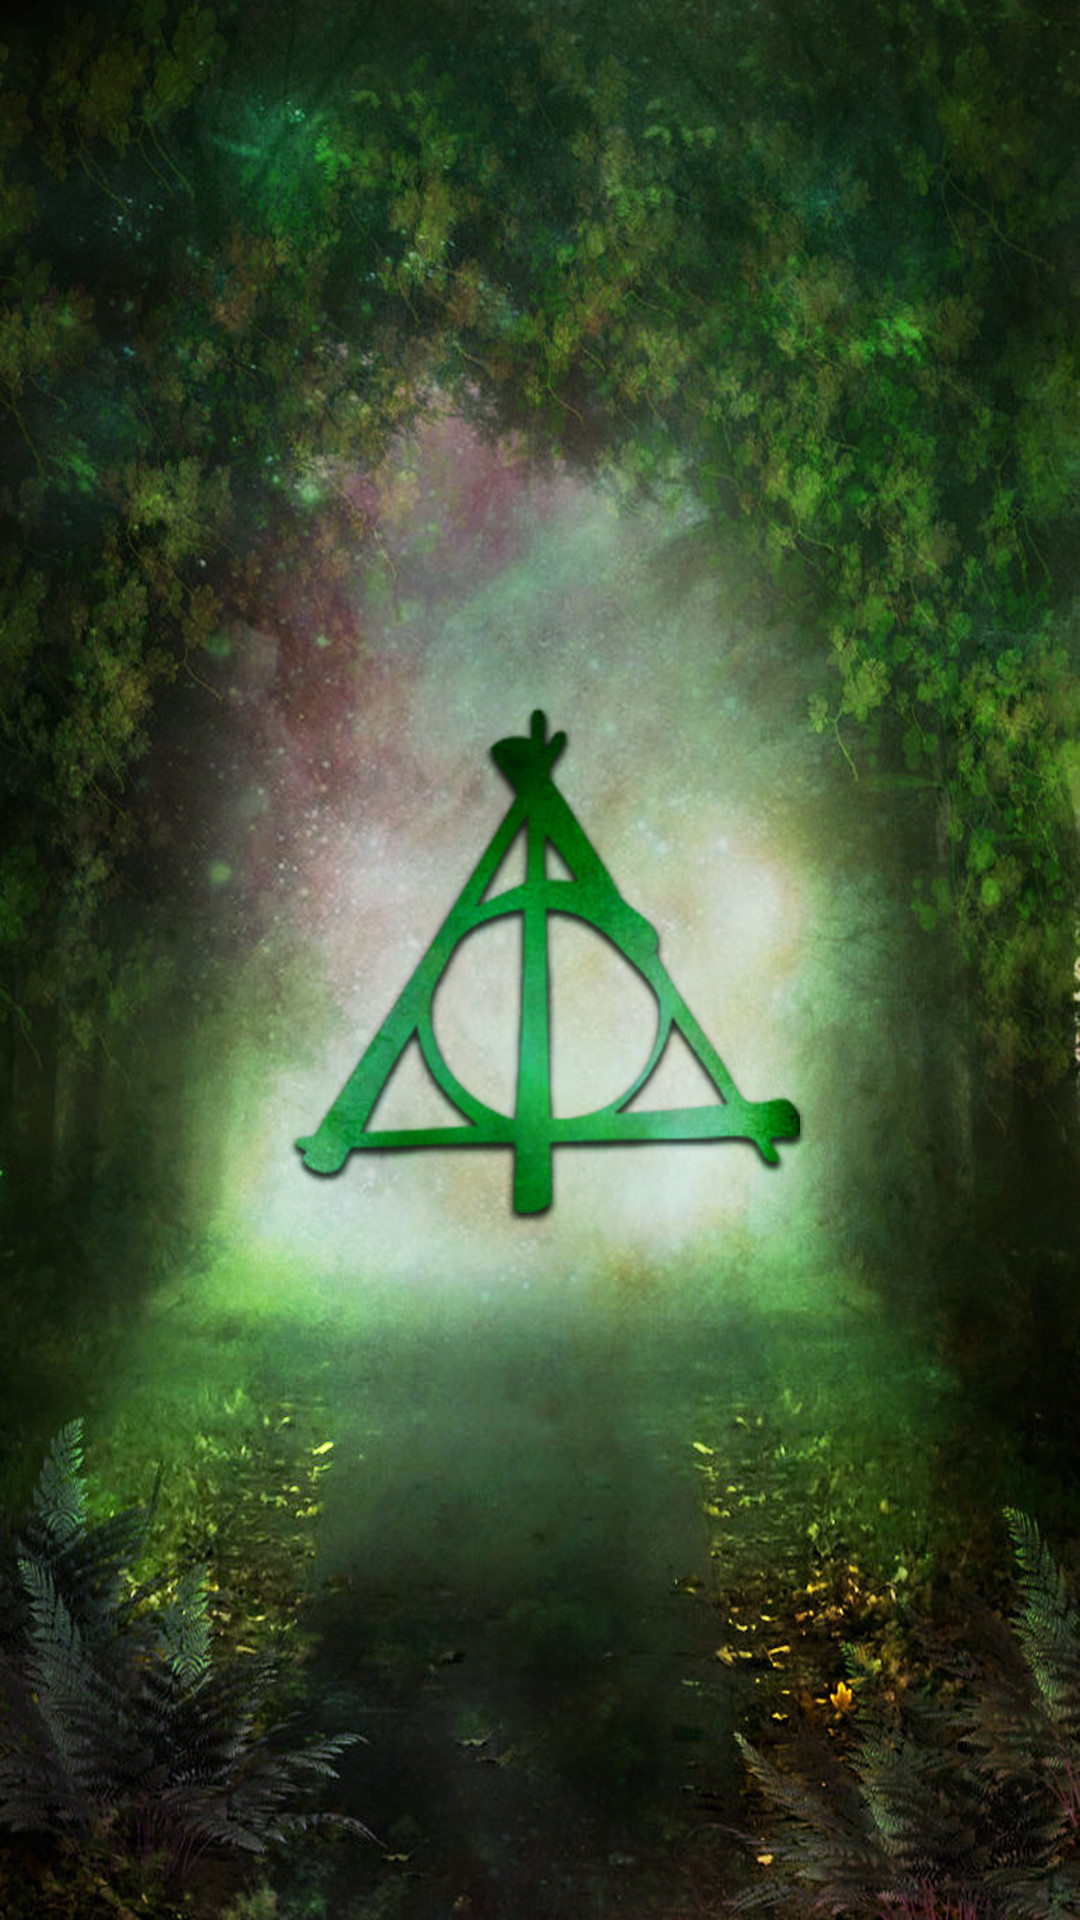 Deathly Hallows wallpaper  Deathly hallows wallpaper Harry potter  wallpaper Deathly hallows symbol